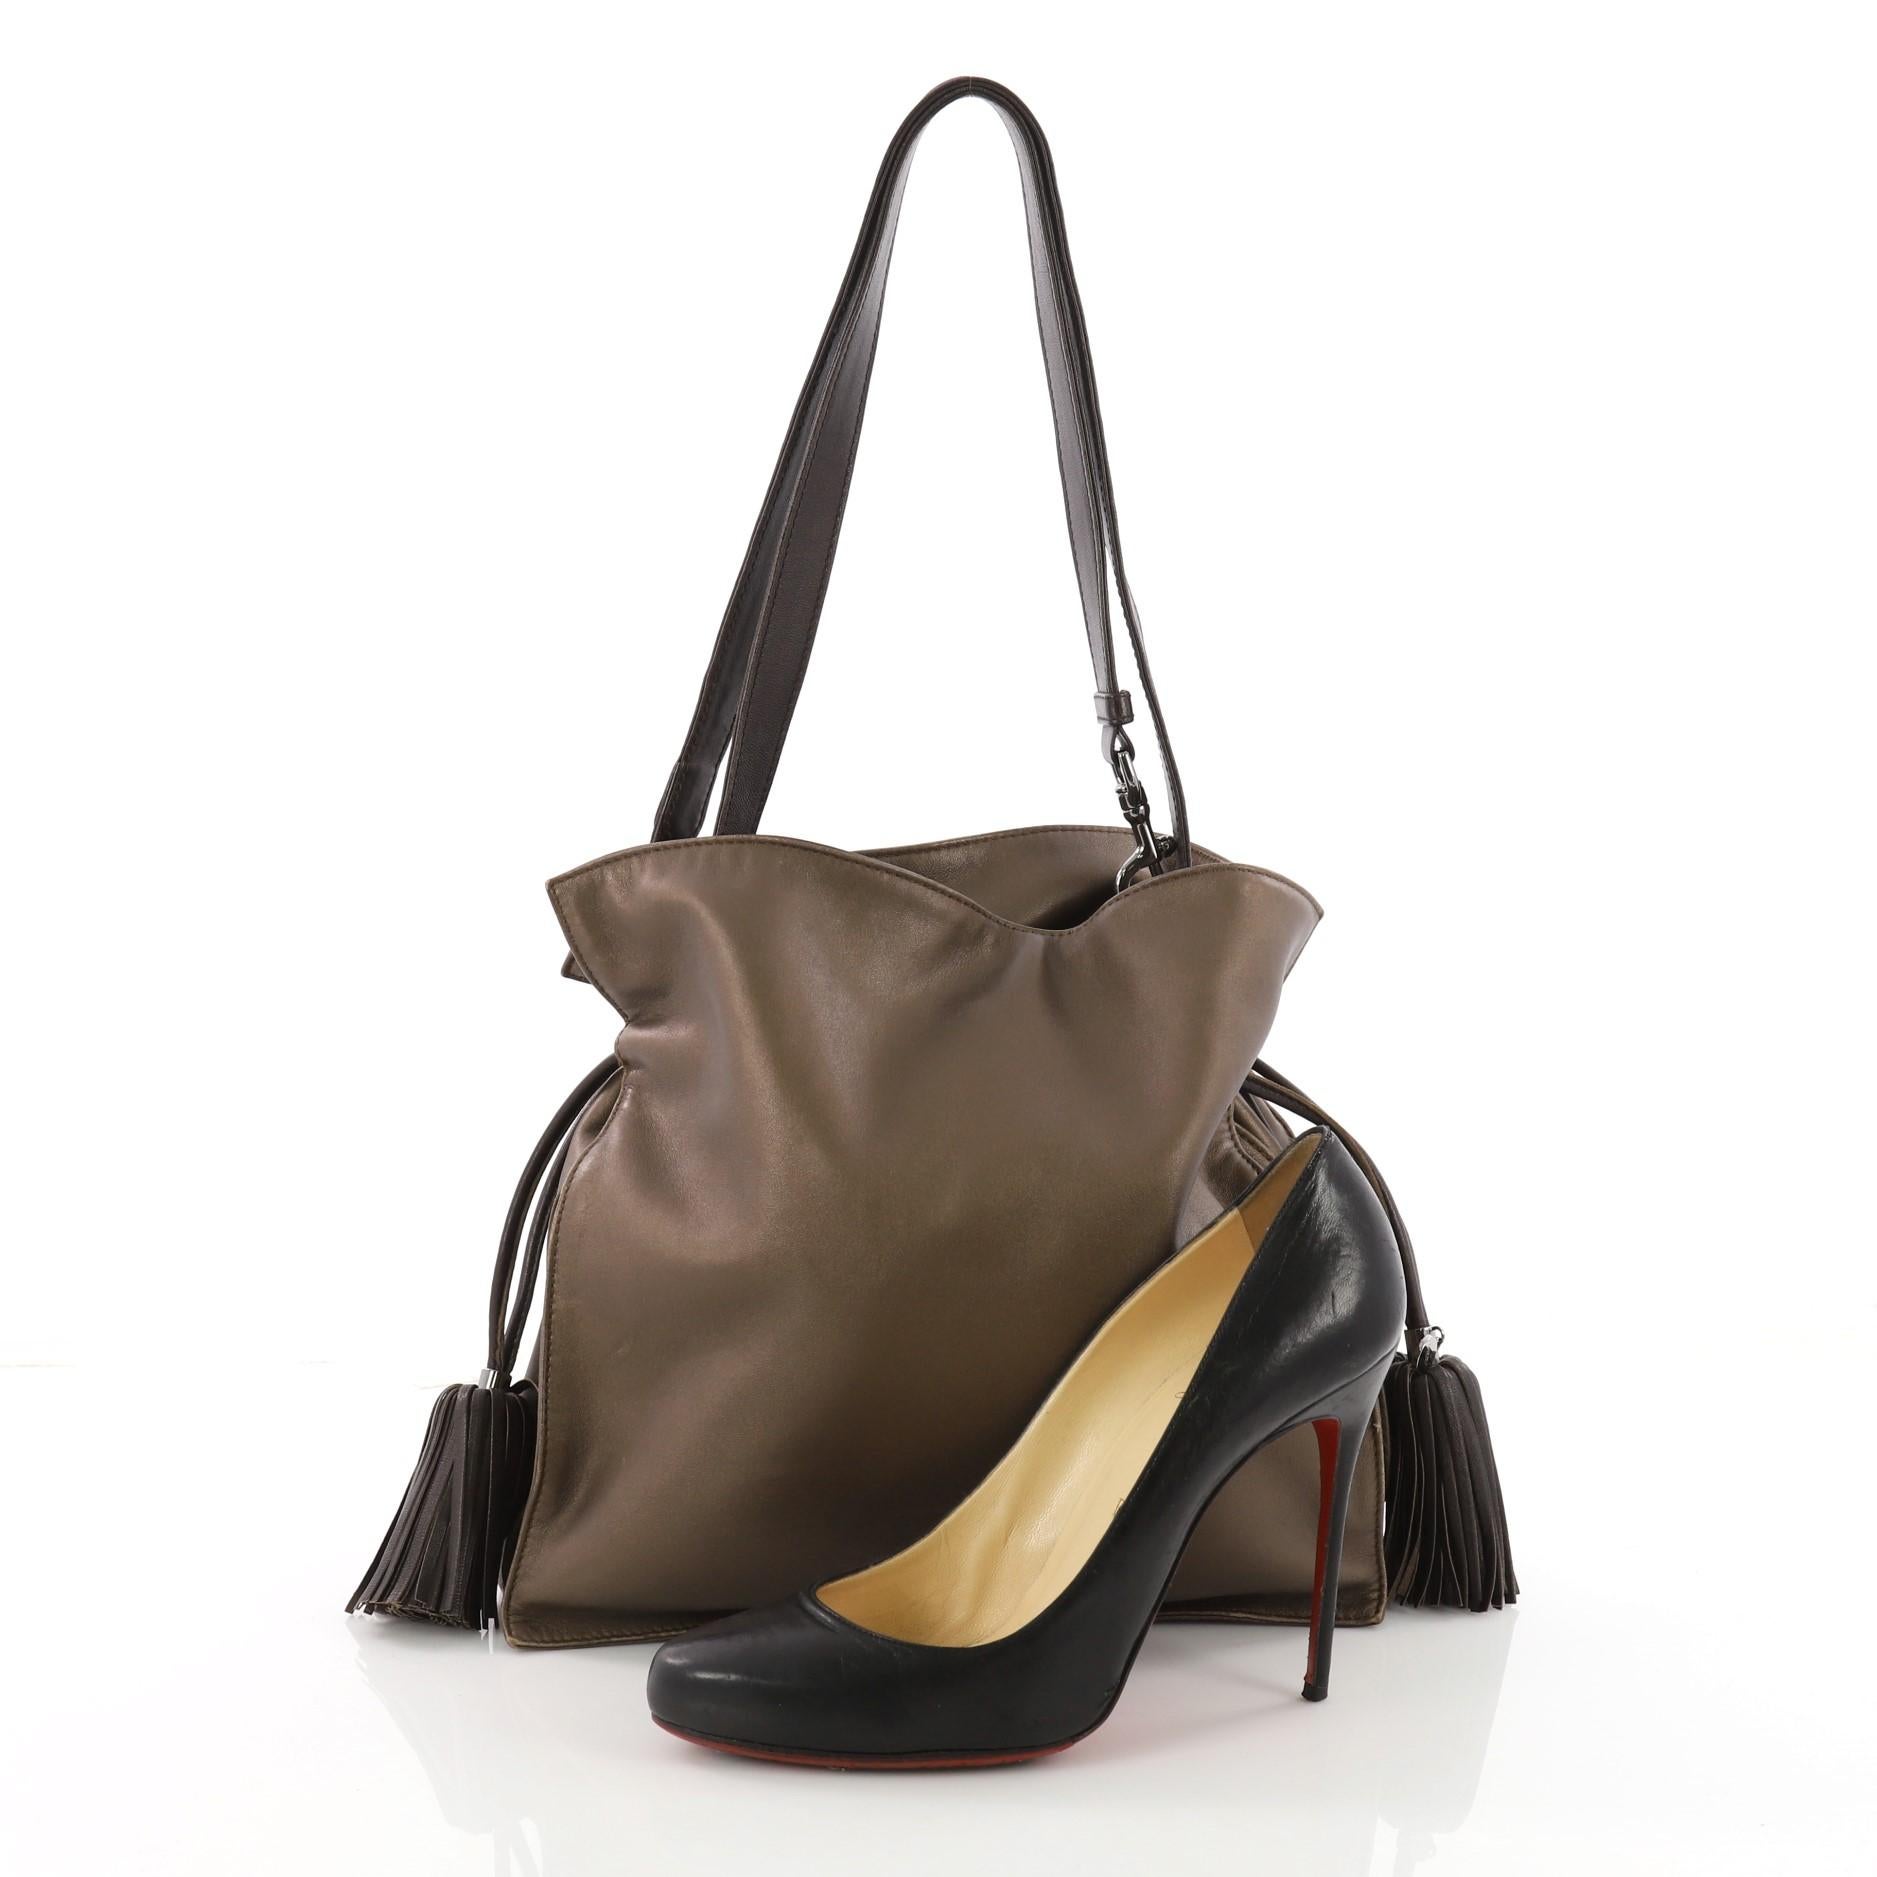 This authentic Loewe Flamenco Bag Leather Medium is simply a must-have for your wardrobe. Crafted in brown leather, this classy stylish bag features leather shoulder straps, drawstring top with oversized tassels, and gunmetal-tone hardware accents.